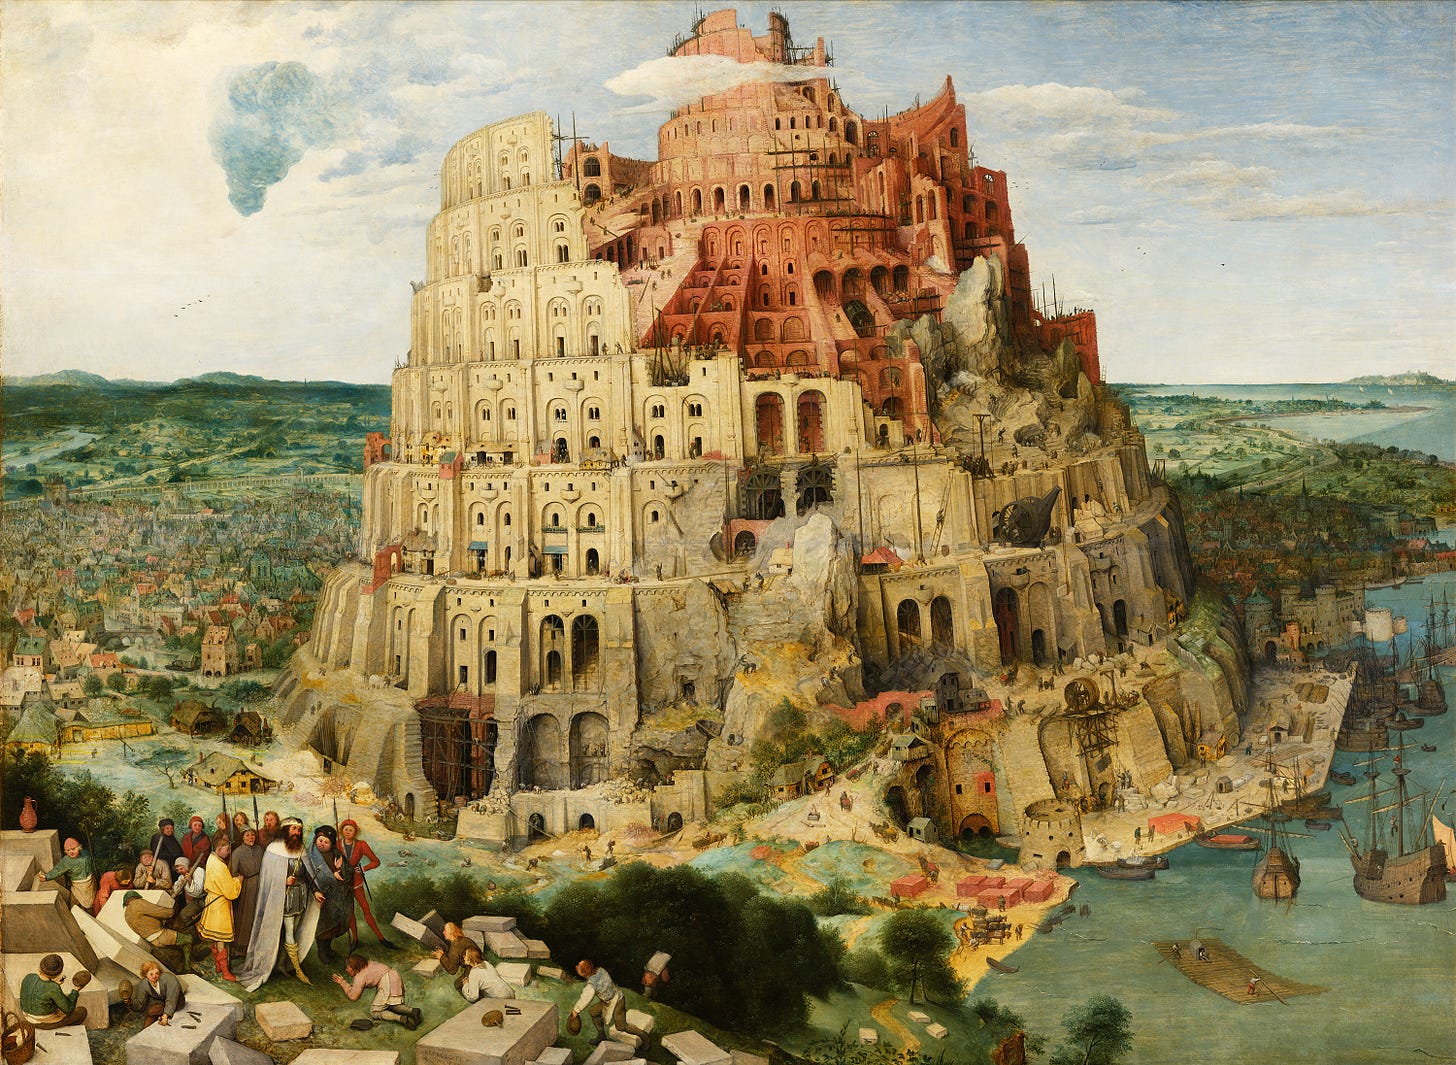 The Tower of Babel, zoomed in